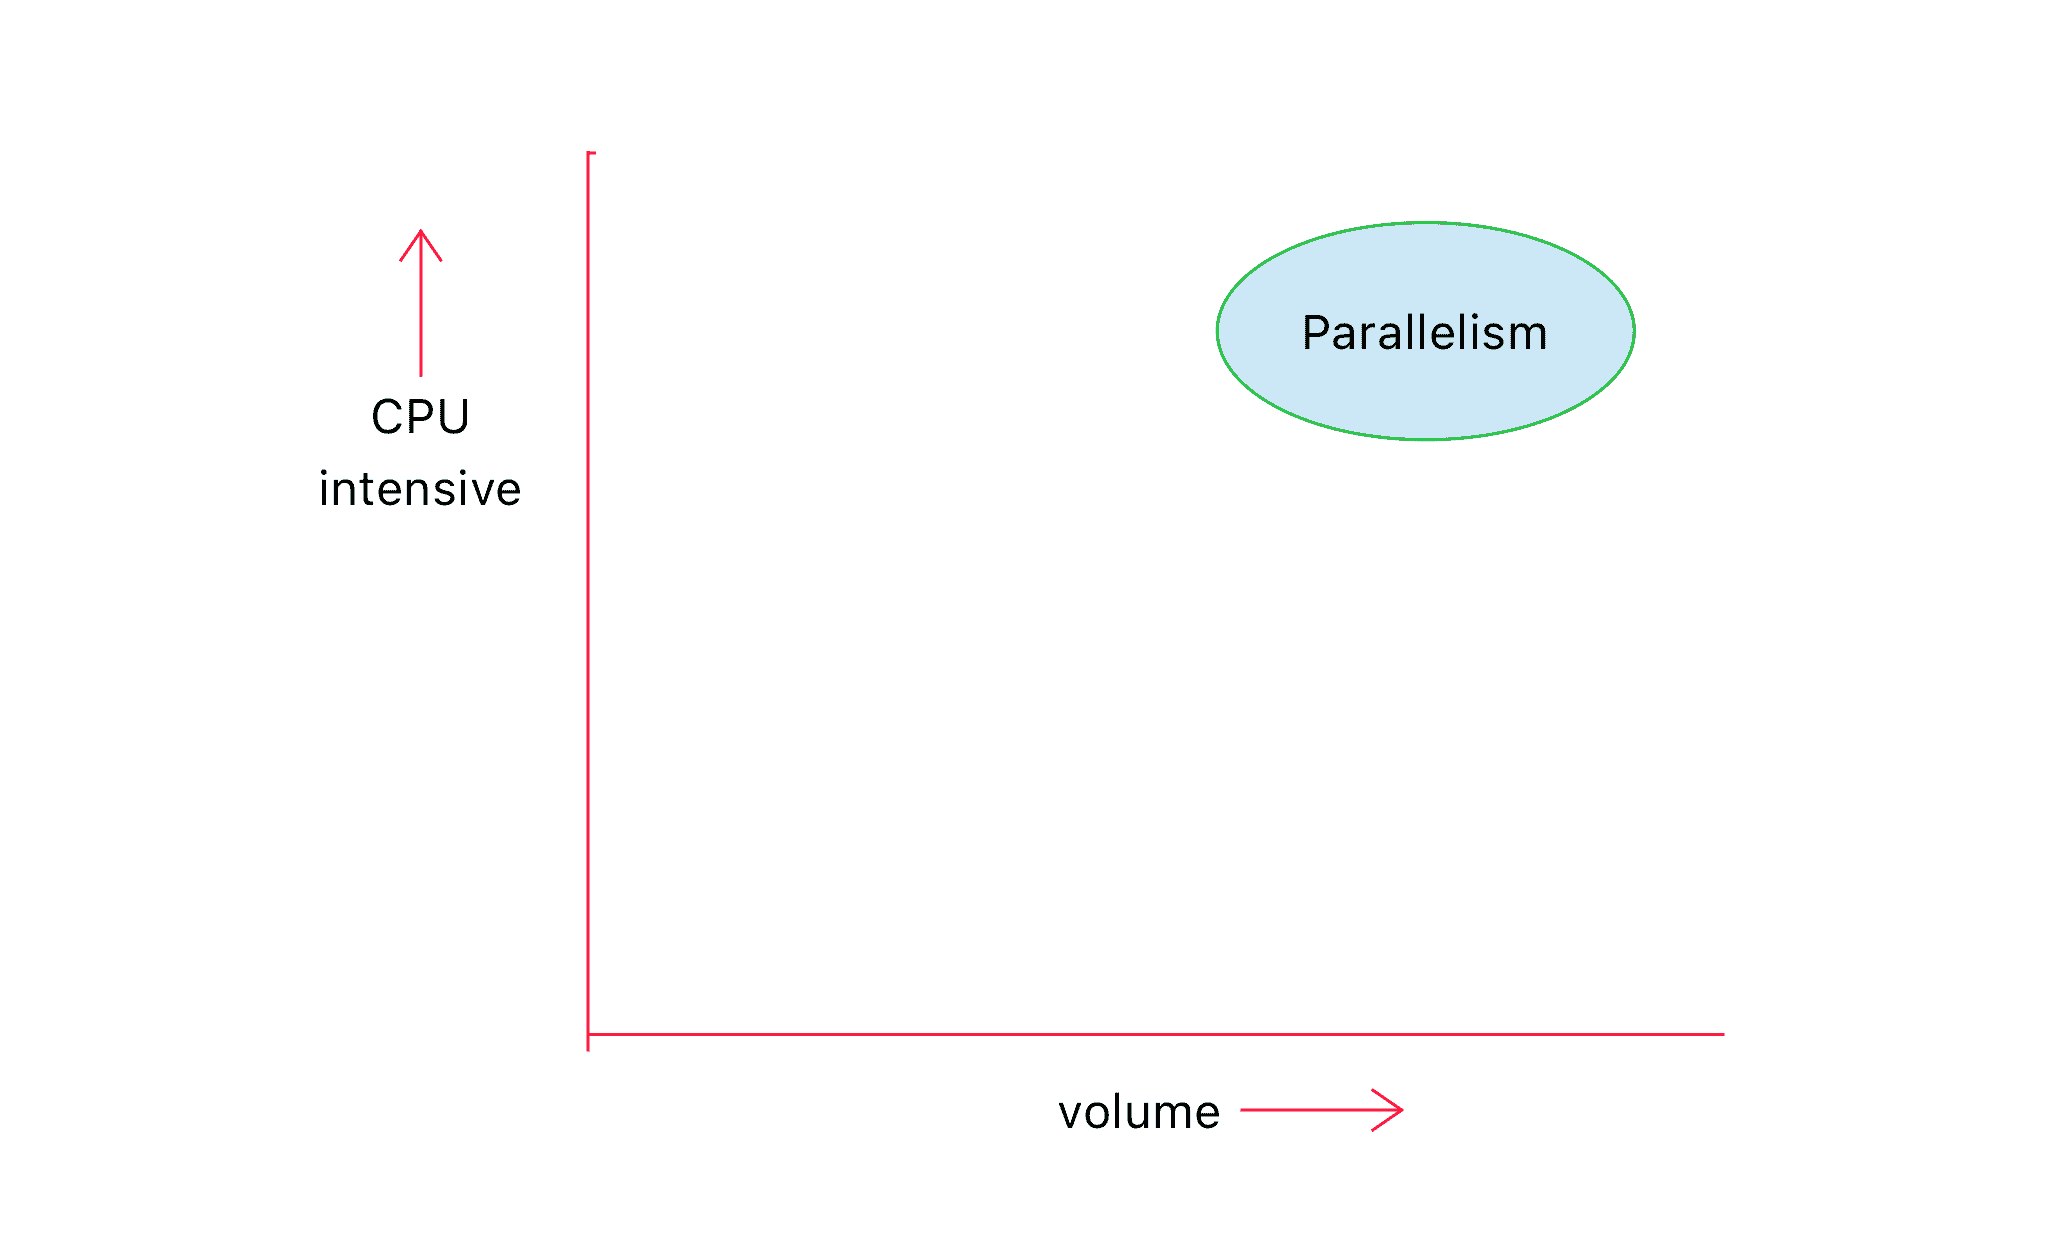 Fig.2: More CPU & Volume support Parallel processing